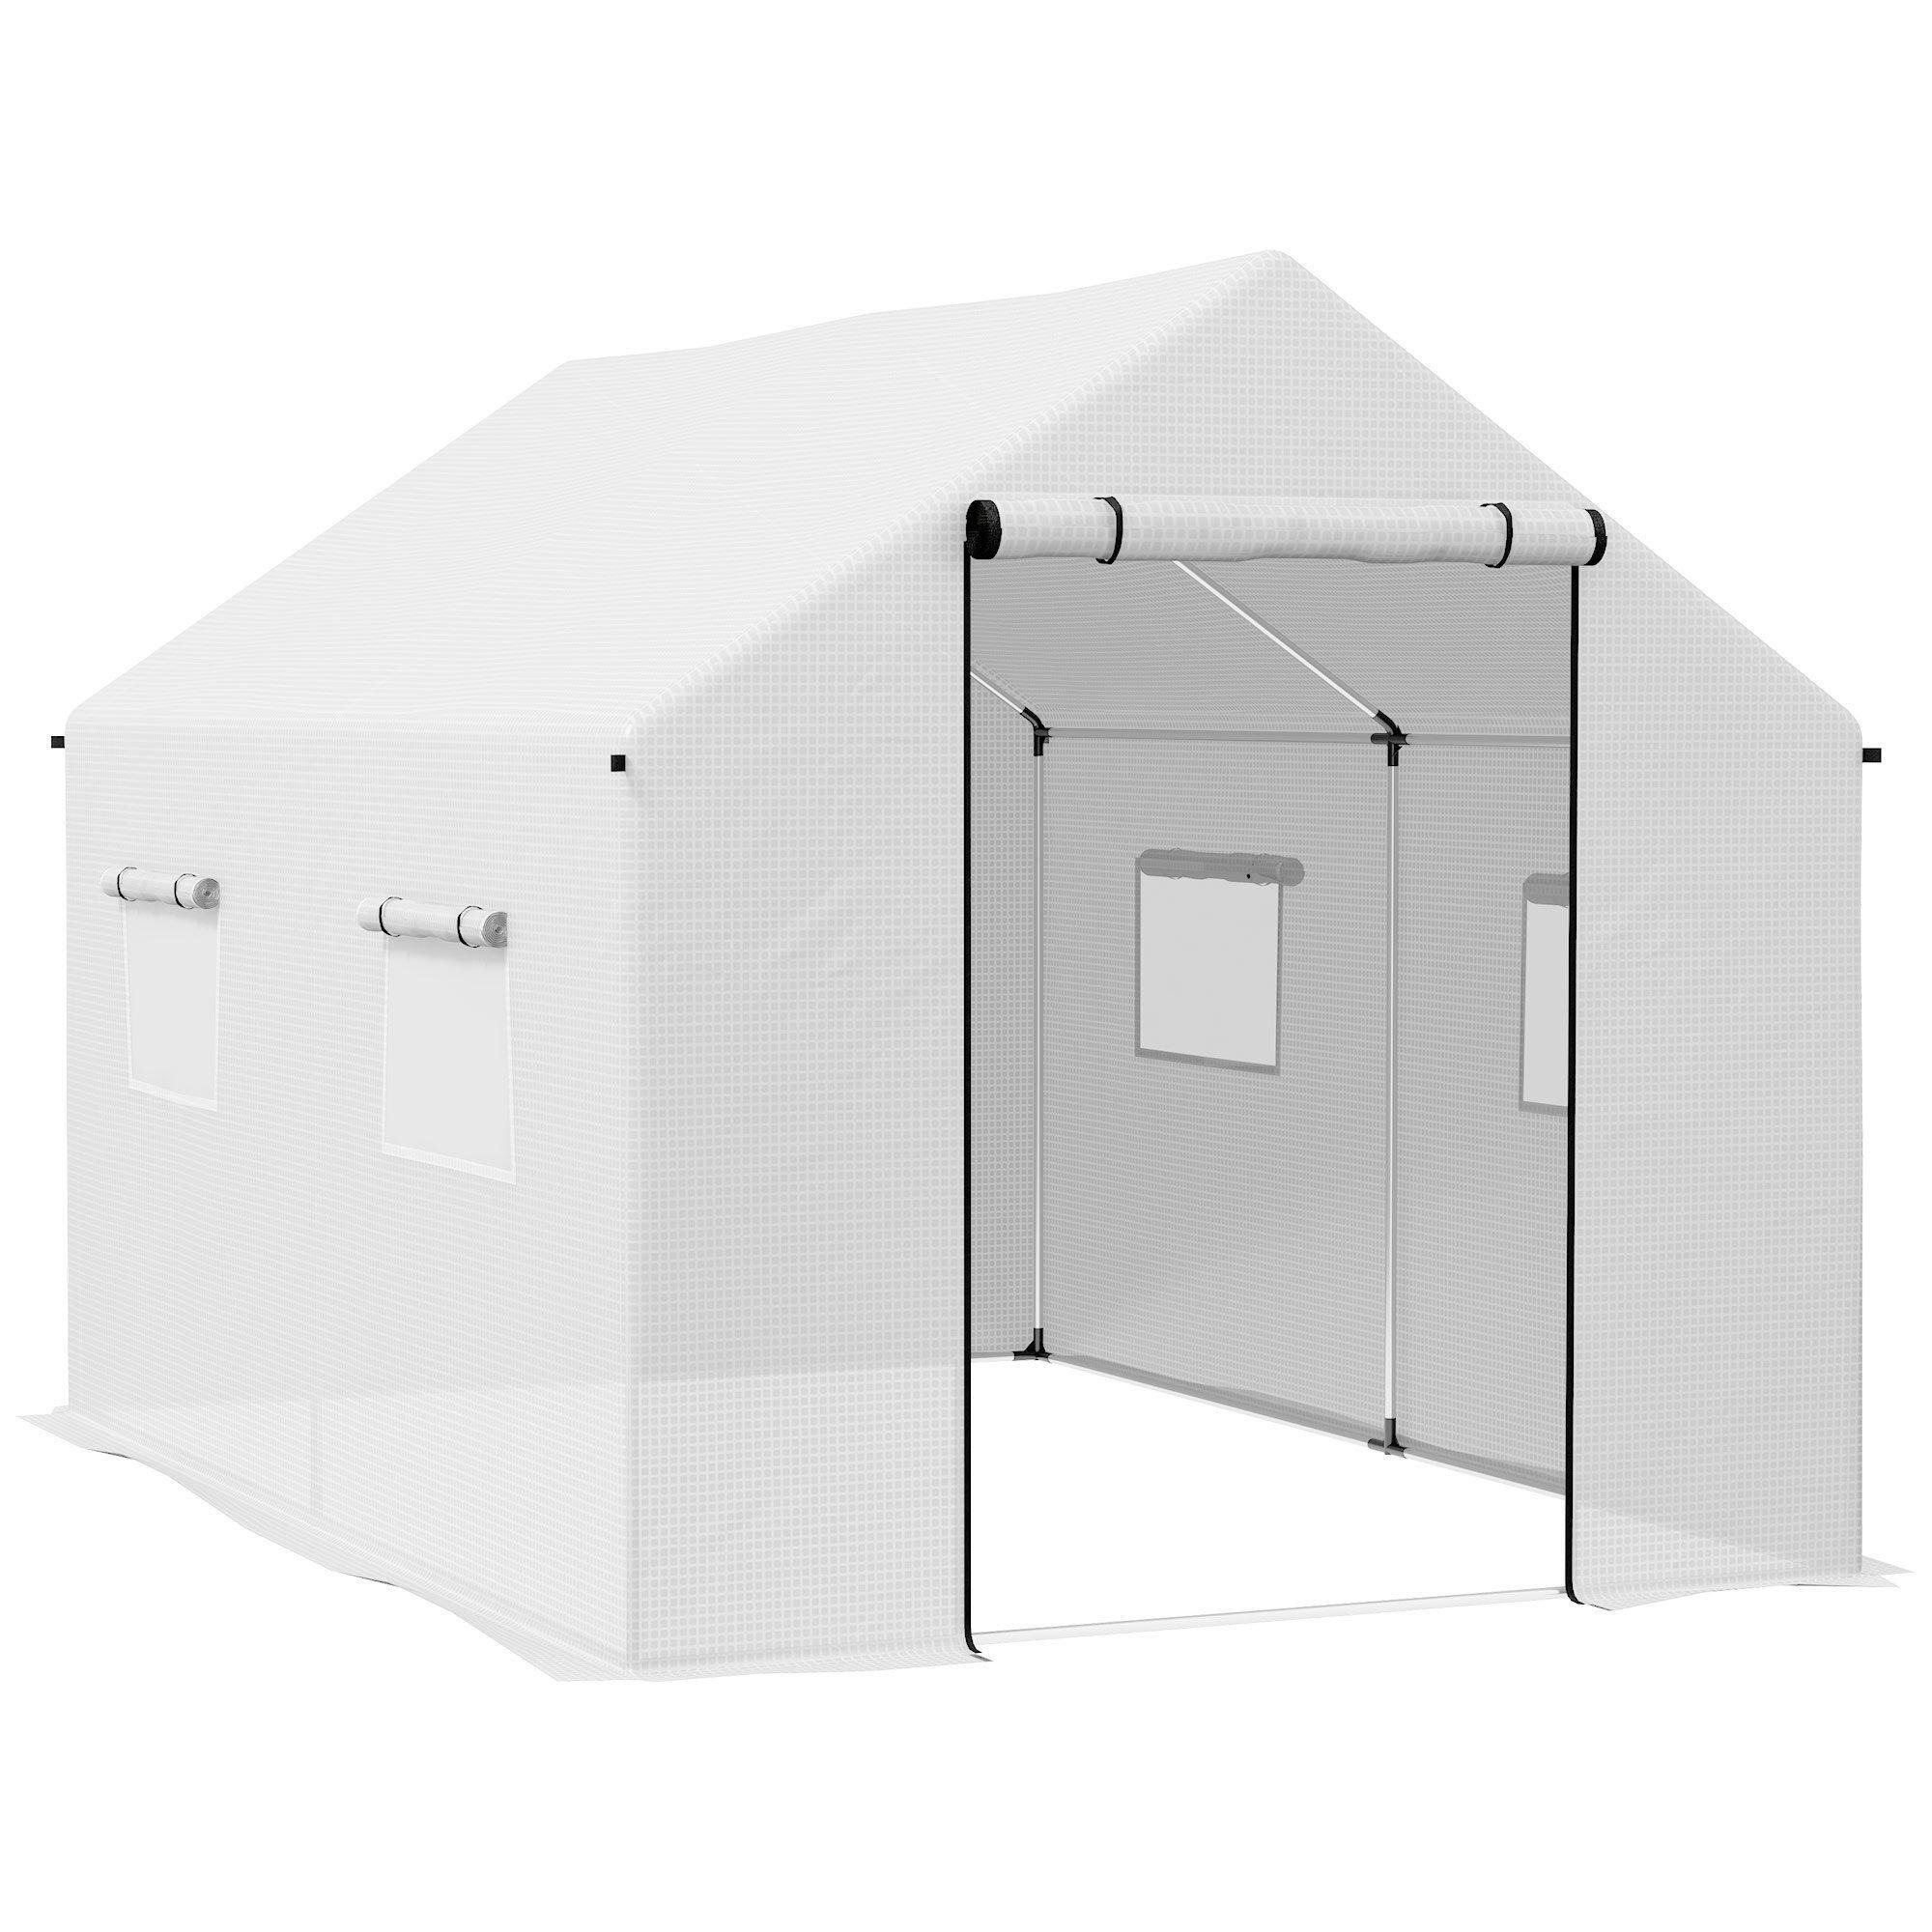 Tunnel Greenhouse W/ UV-resistant PE Cover, Wide Door, 2 x 3(m) - image 1